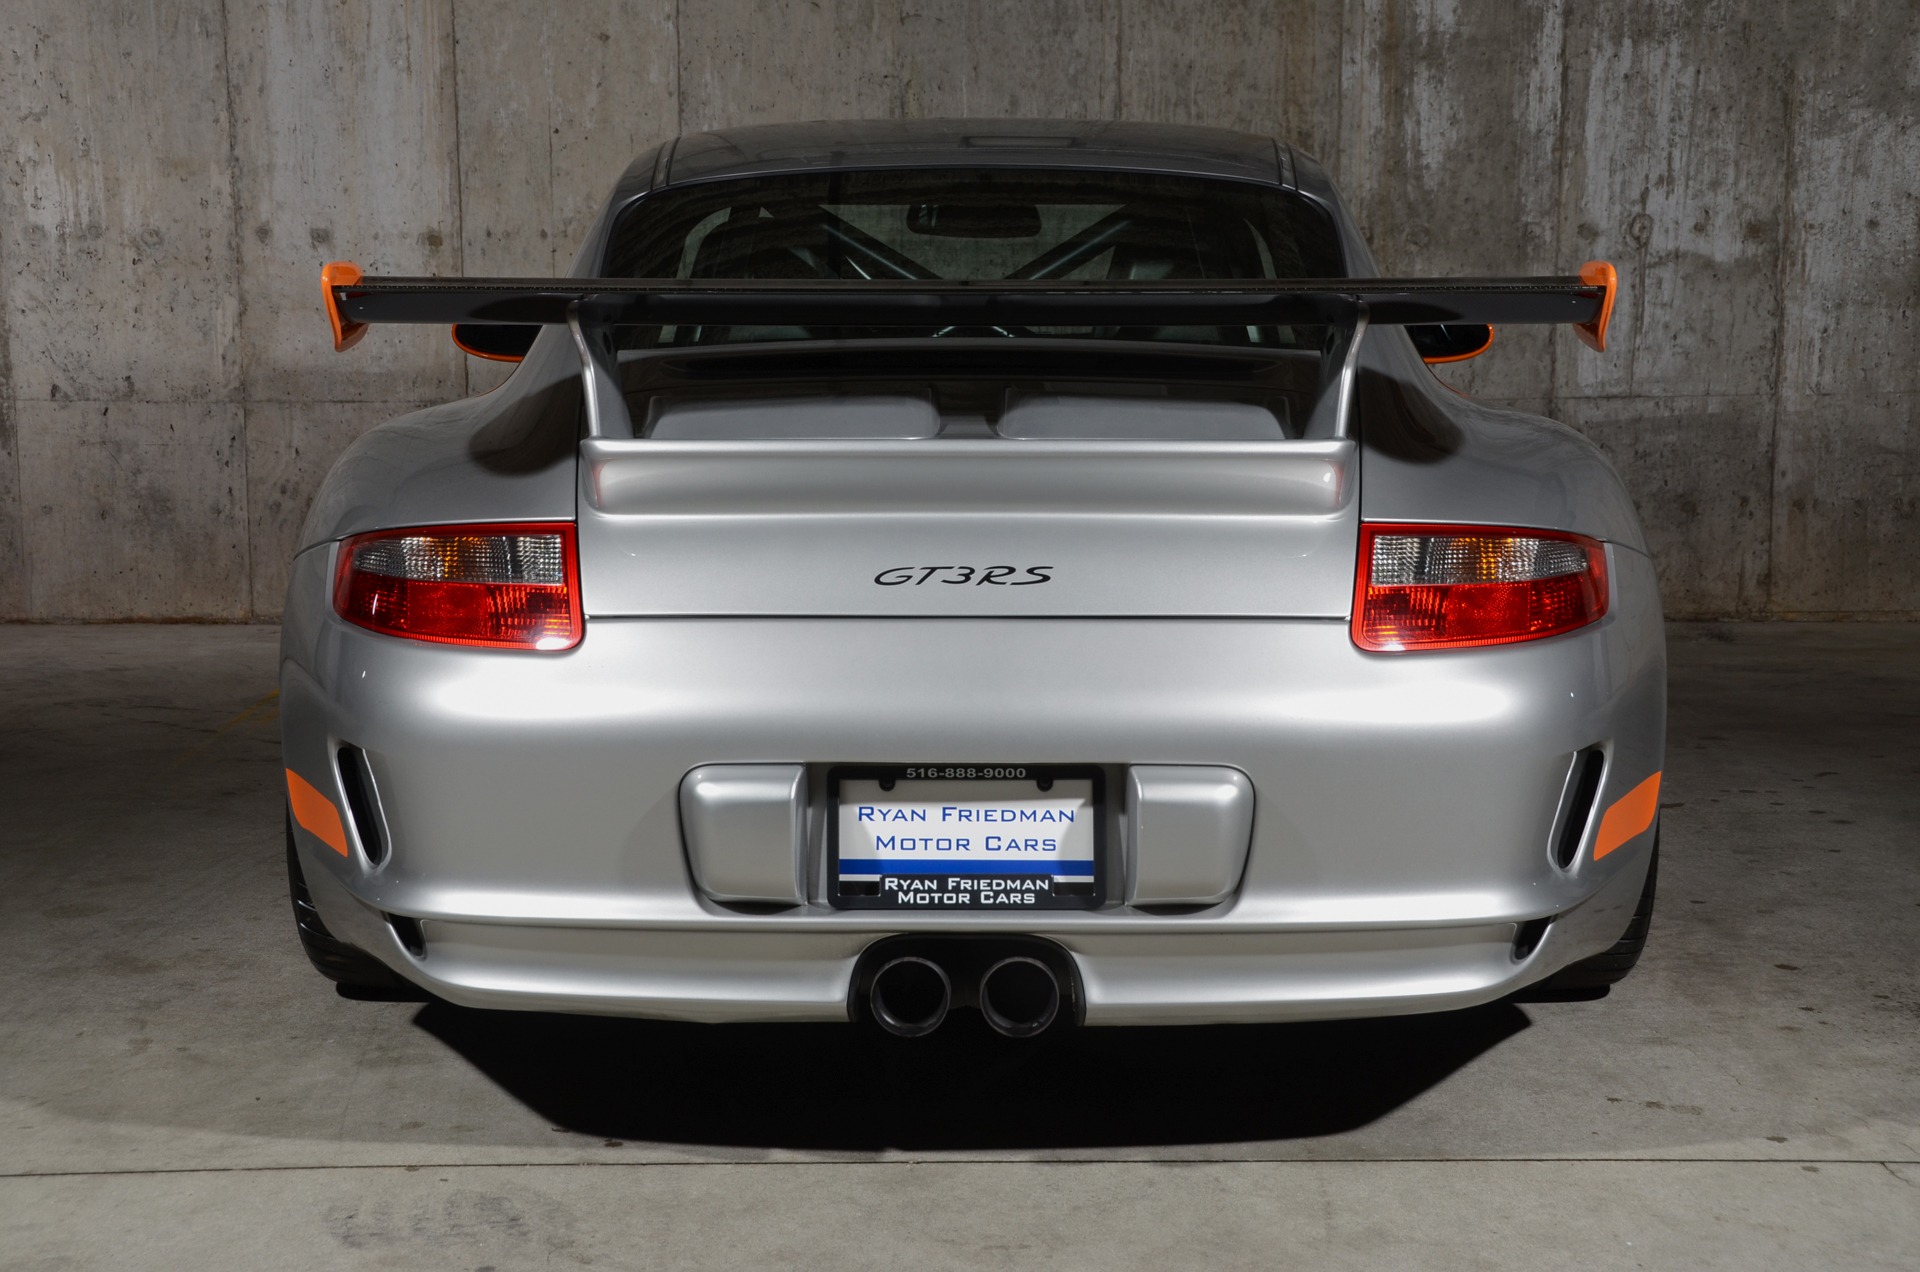 Used 2007 Porsche 911 GT3 RS For Sale ($249,995) | Ryan Friedman 